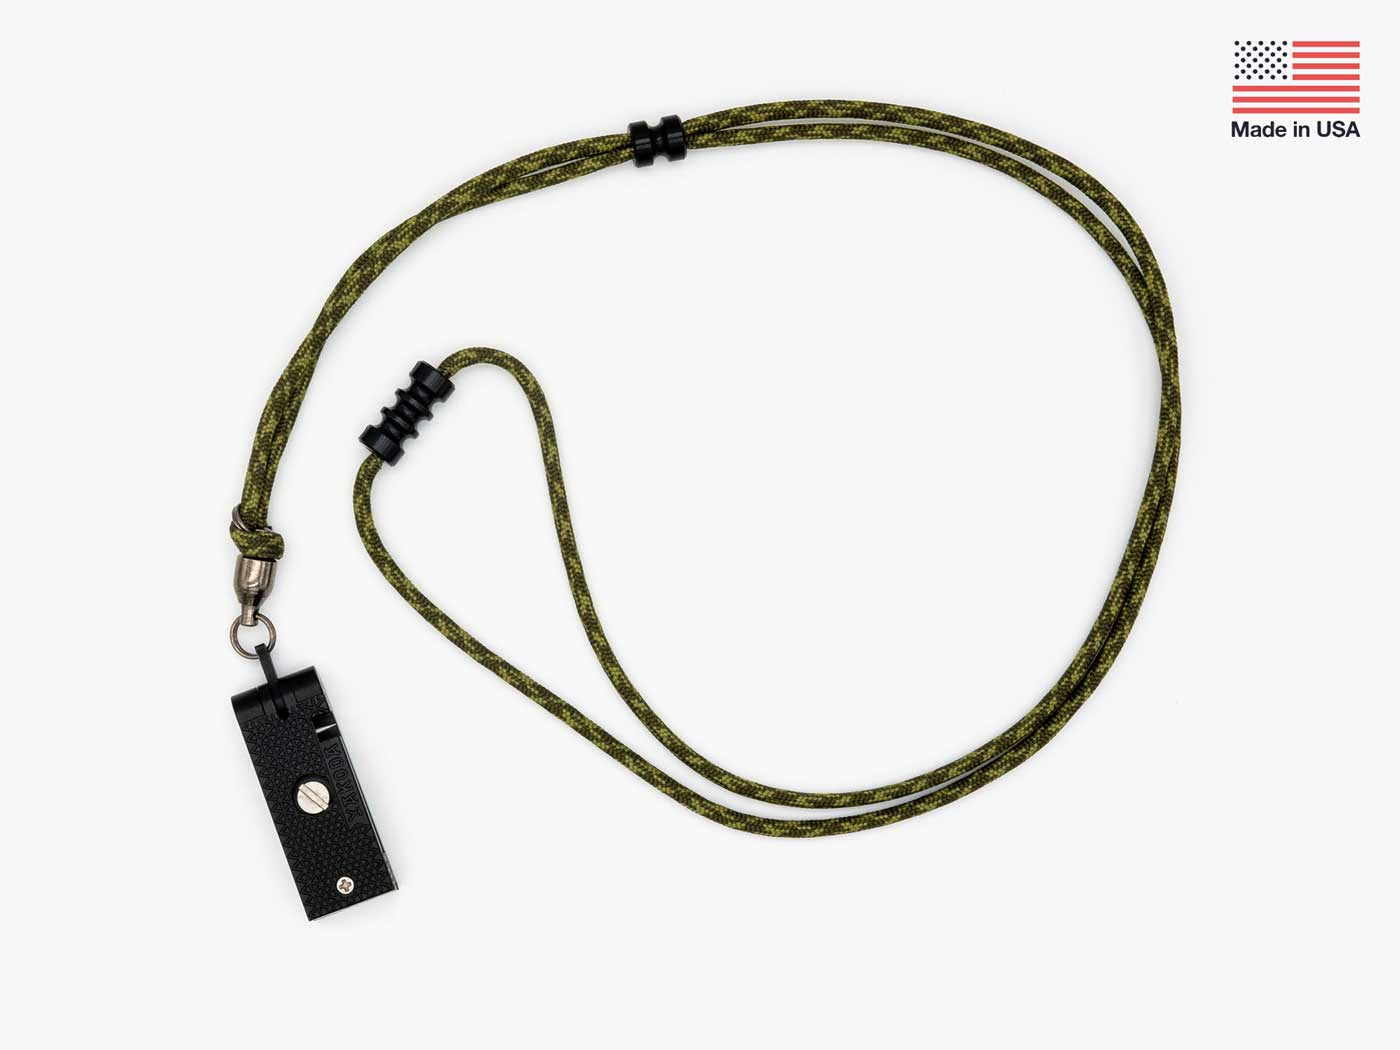 River Canyon - Pouch Lanyard with Nippers - This Fly Fishing Lanyard Has A Water-Resistant Zipper Pouch, Nippers Are Also Included. There Is A Loop